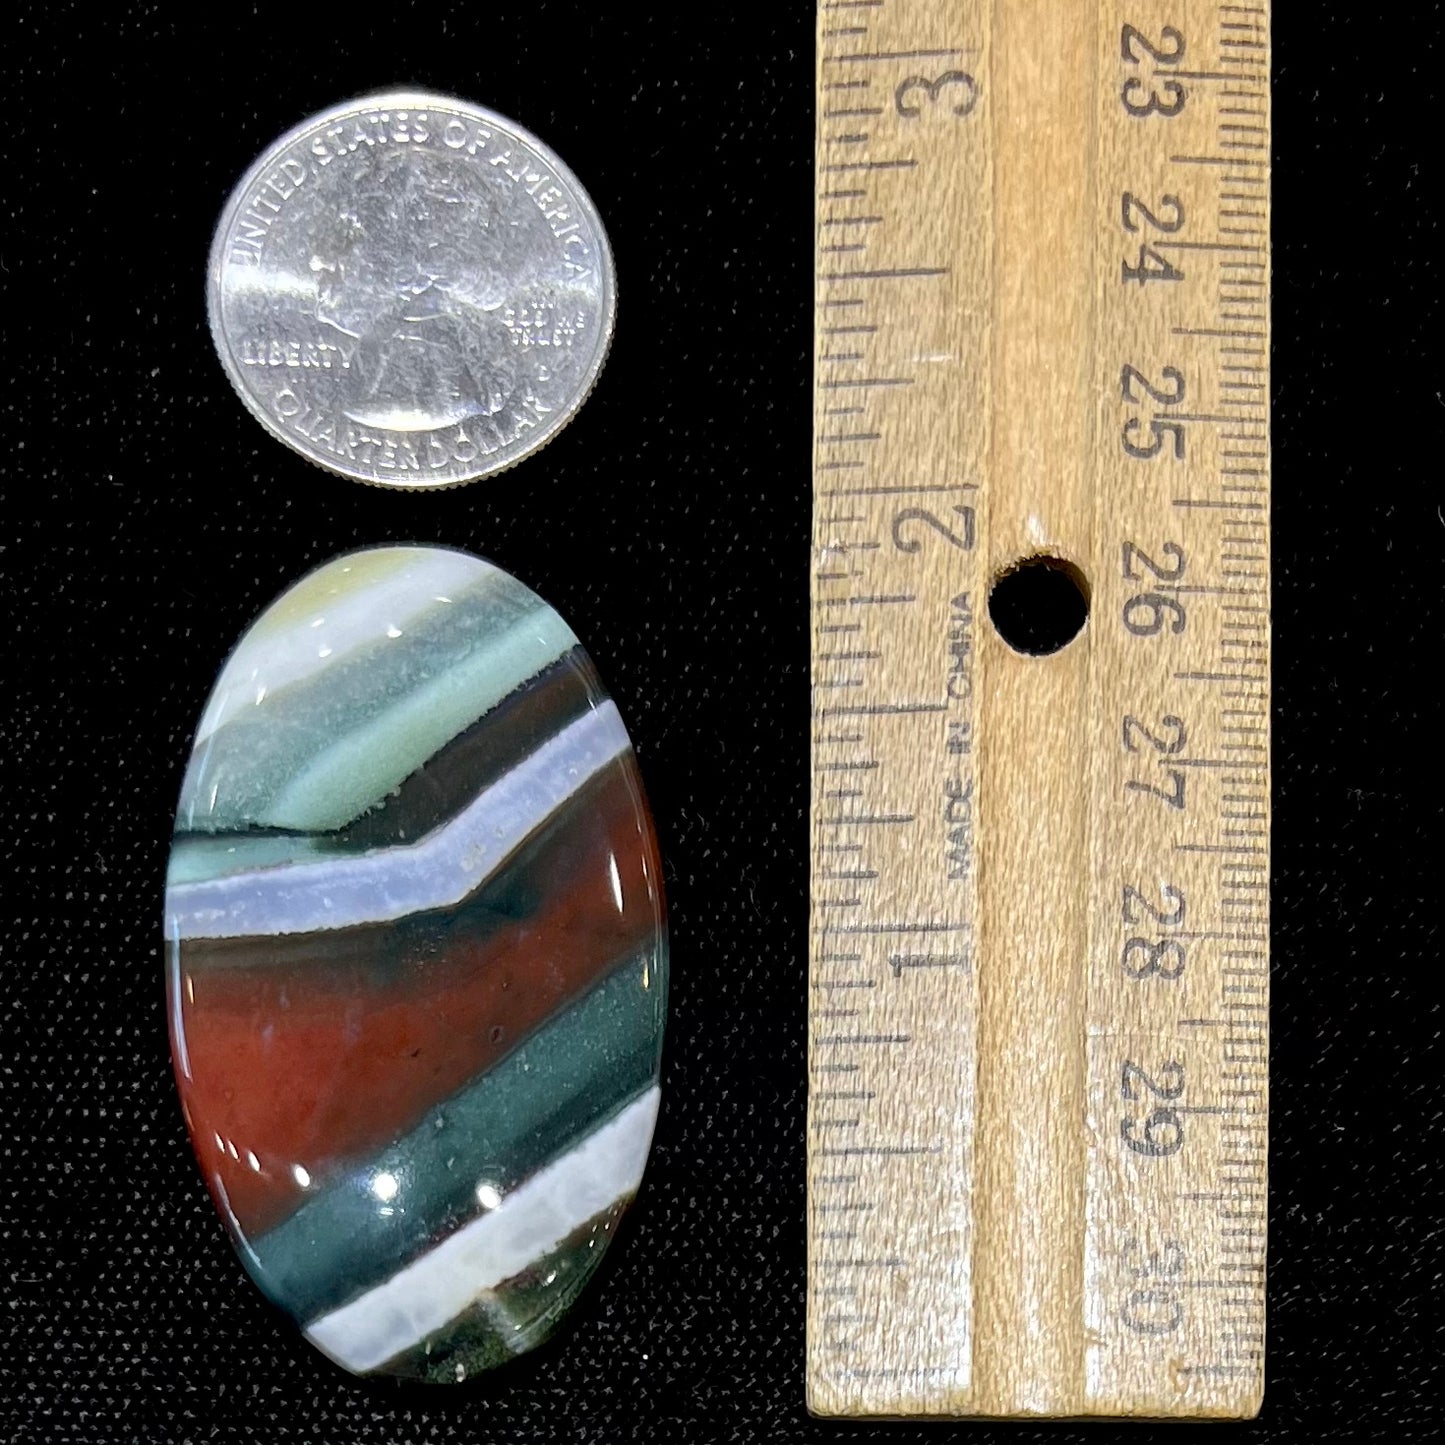 Loose Arizona agate cabochon for sale set on white background.  Stone is striped with red, green, and white.